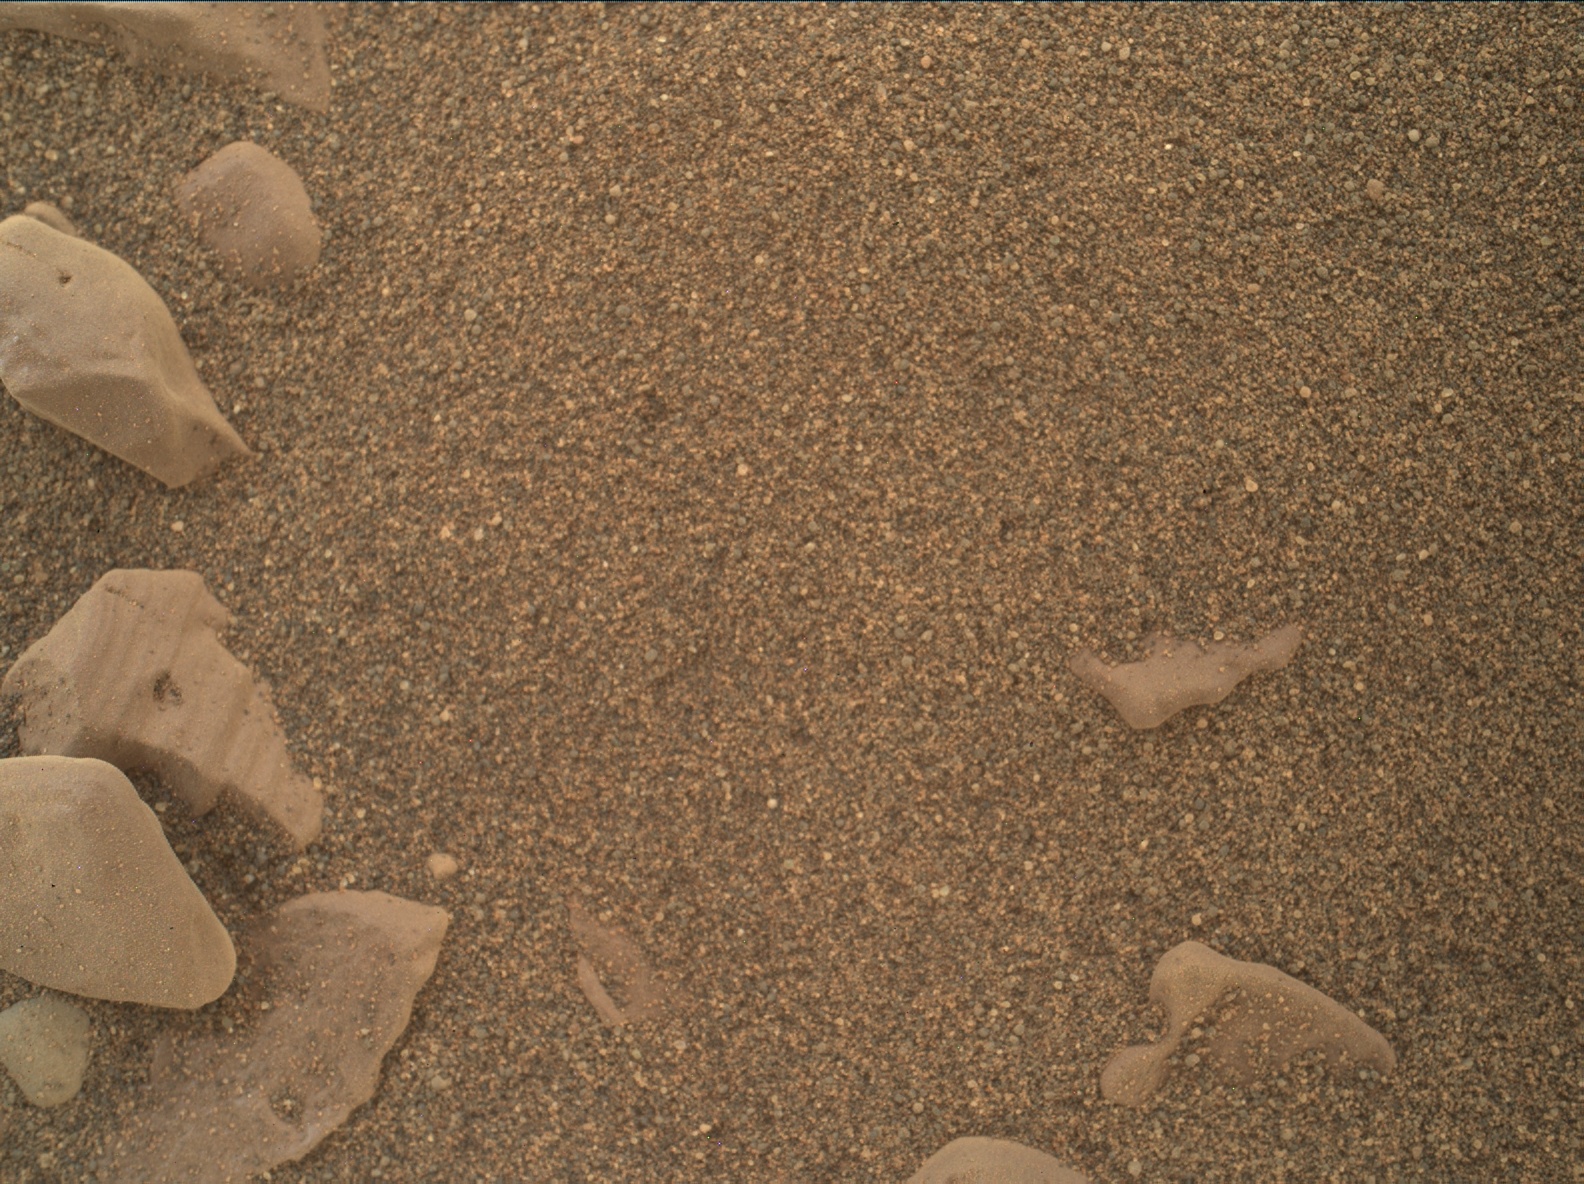 Nasa's Mars rover Curiosity acquired this image using its Mars Hand Lens Imager (MAHLI) on Sol 1897